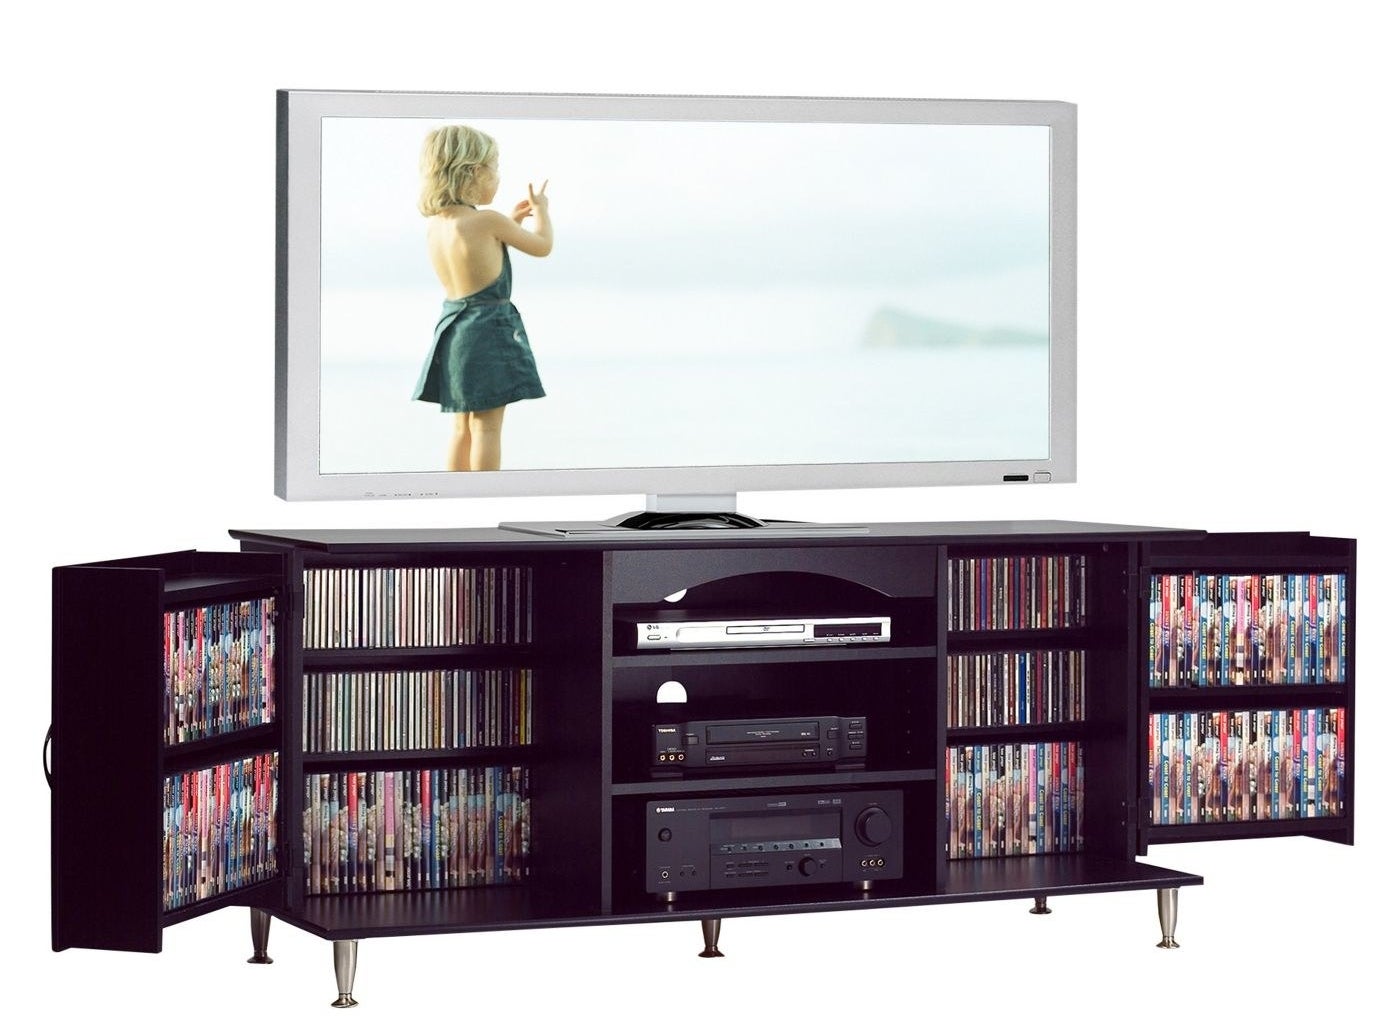 The TV stand filled with media and a TV on top.